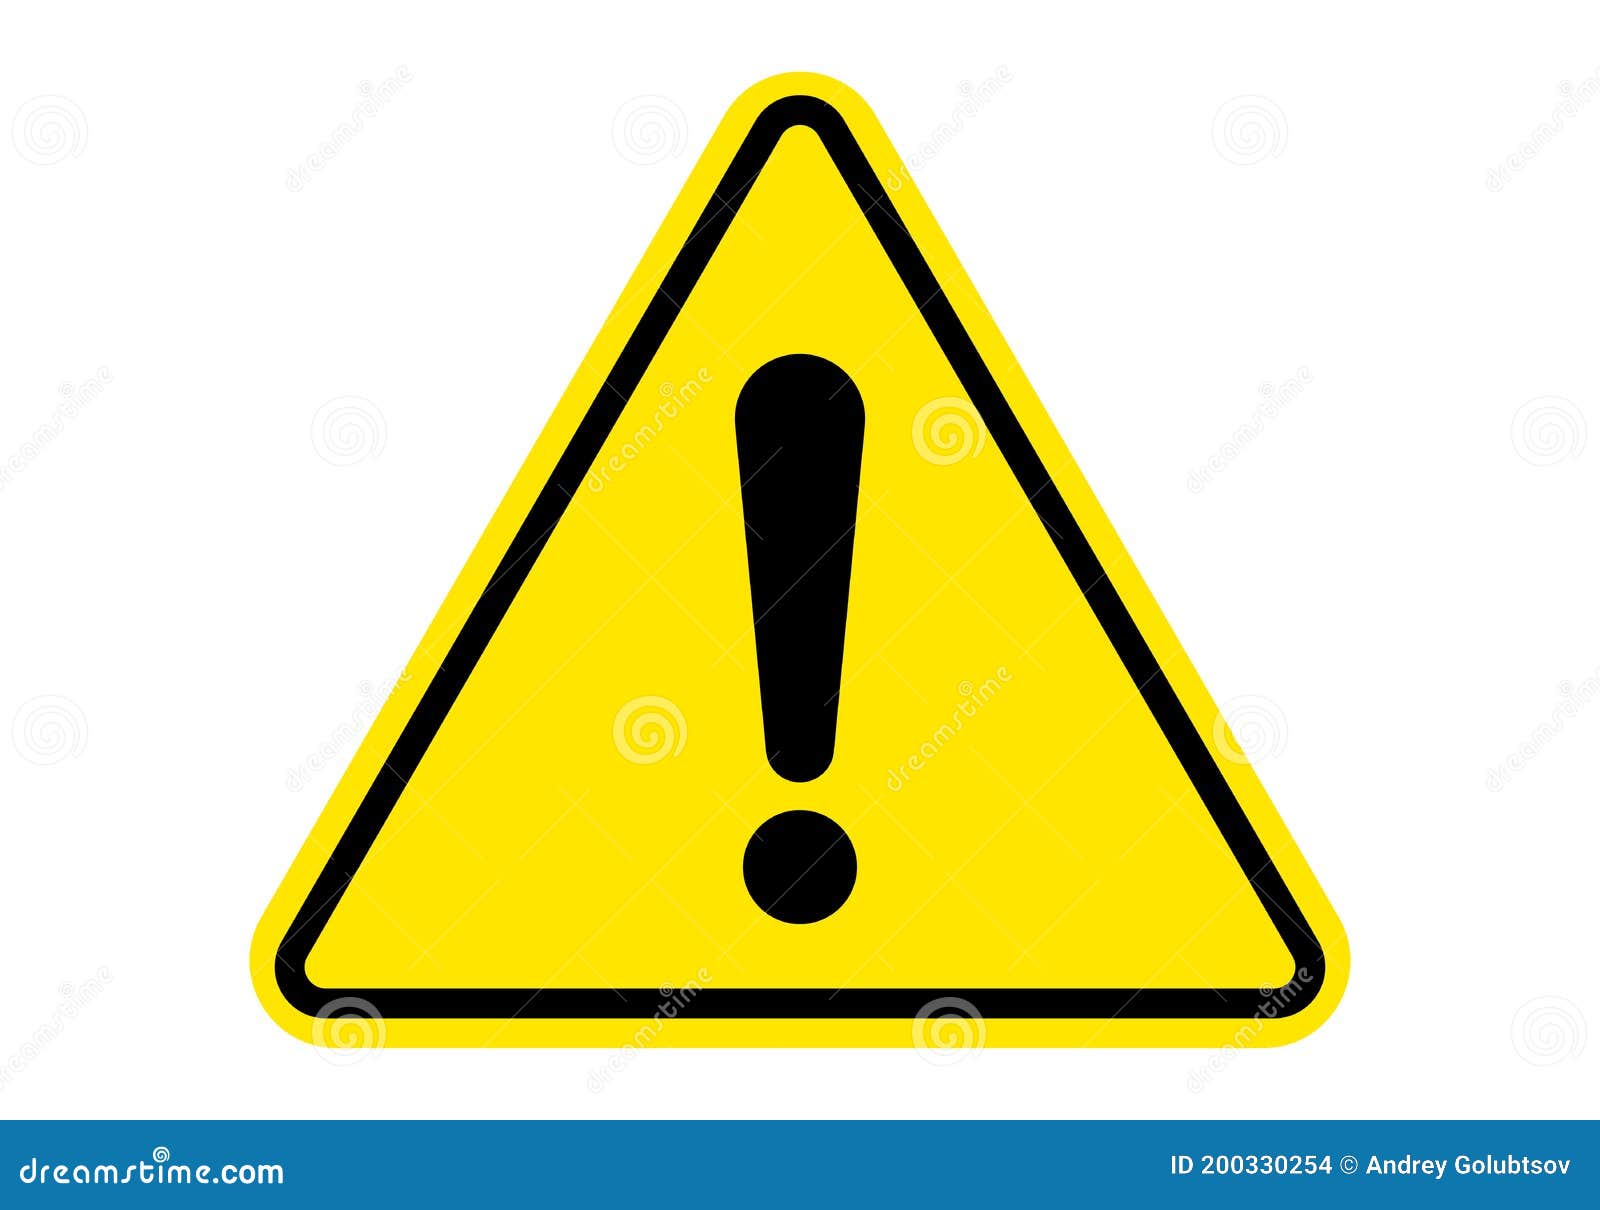 warning sign attention caution exclamation sign, alert danger yellow triangle icon